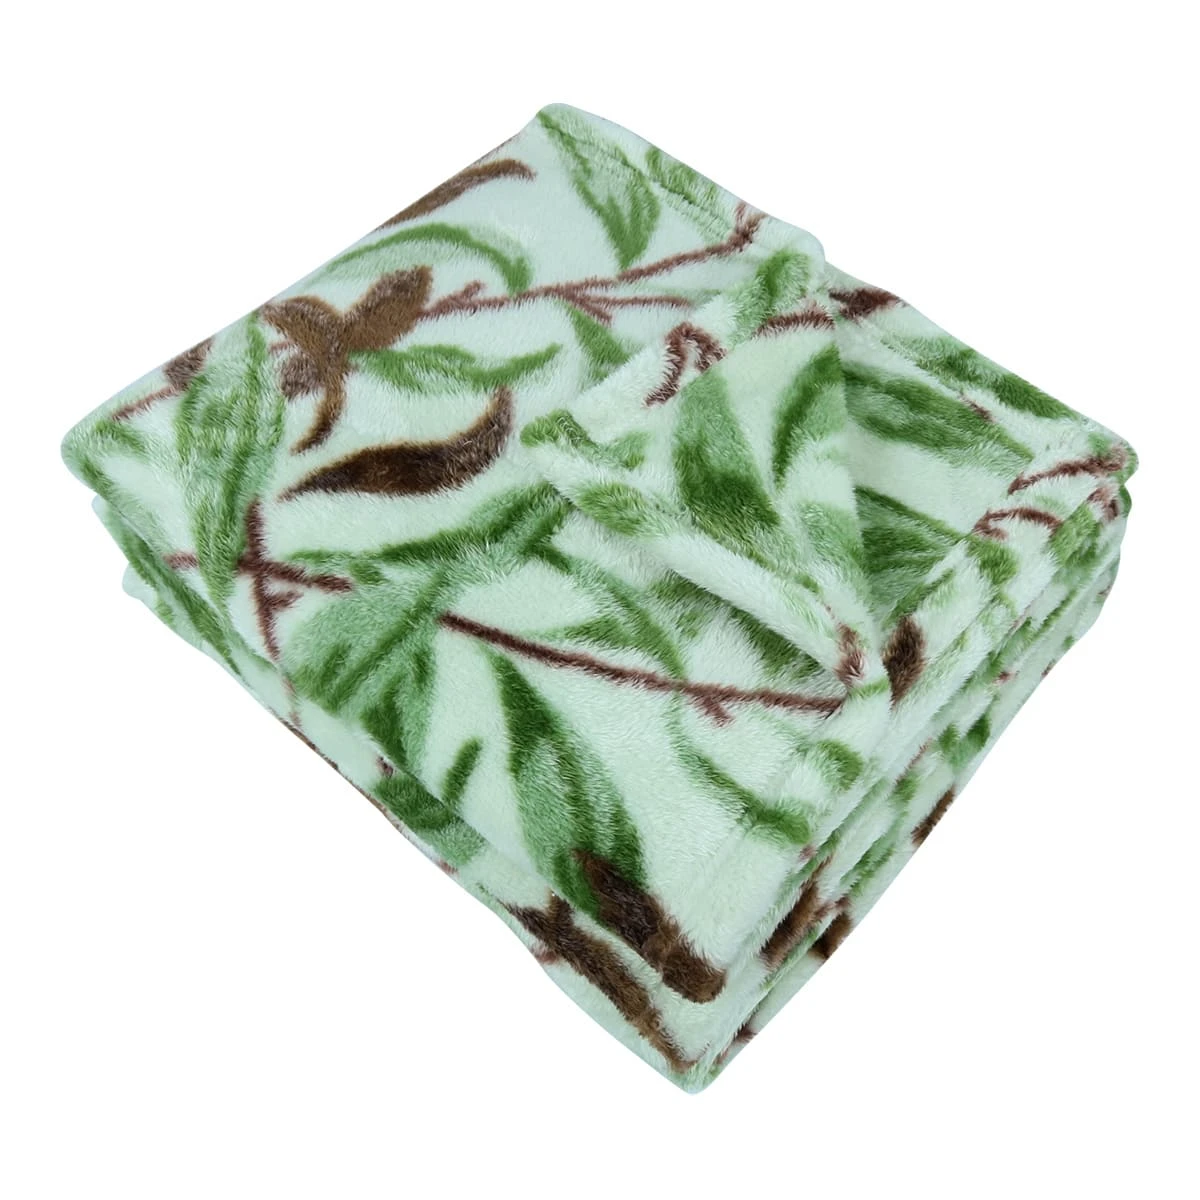 100% Recycled Polyester Frosted Printed Plush Blanket (Leaves)